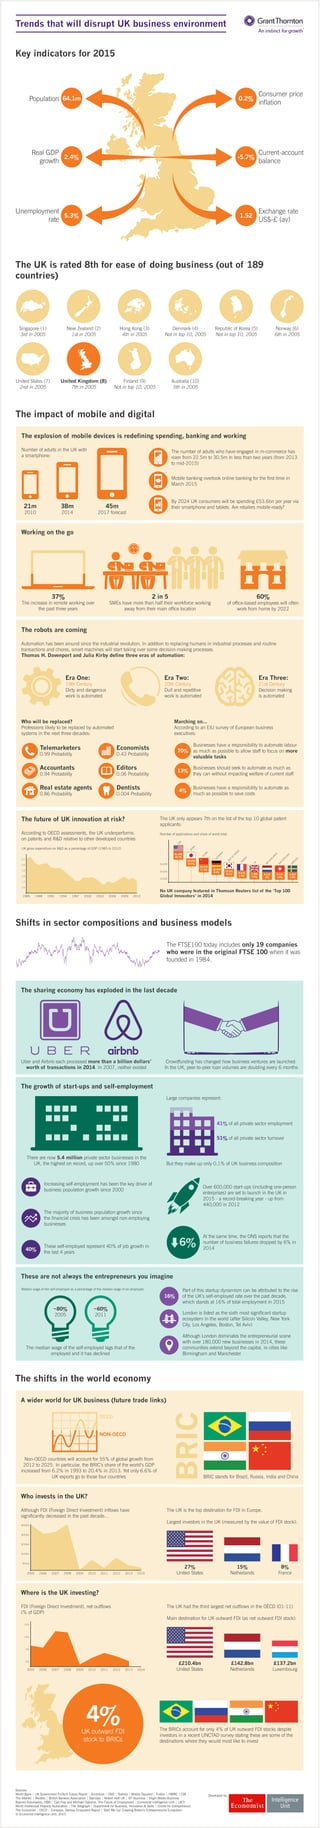 Trends that will disrupt the UK business environment